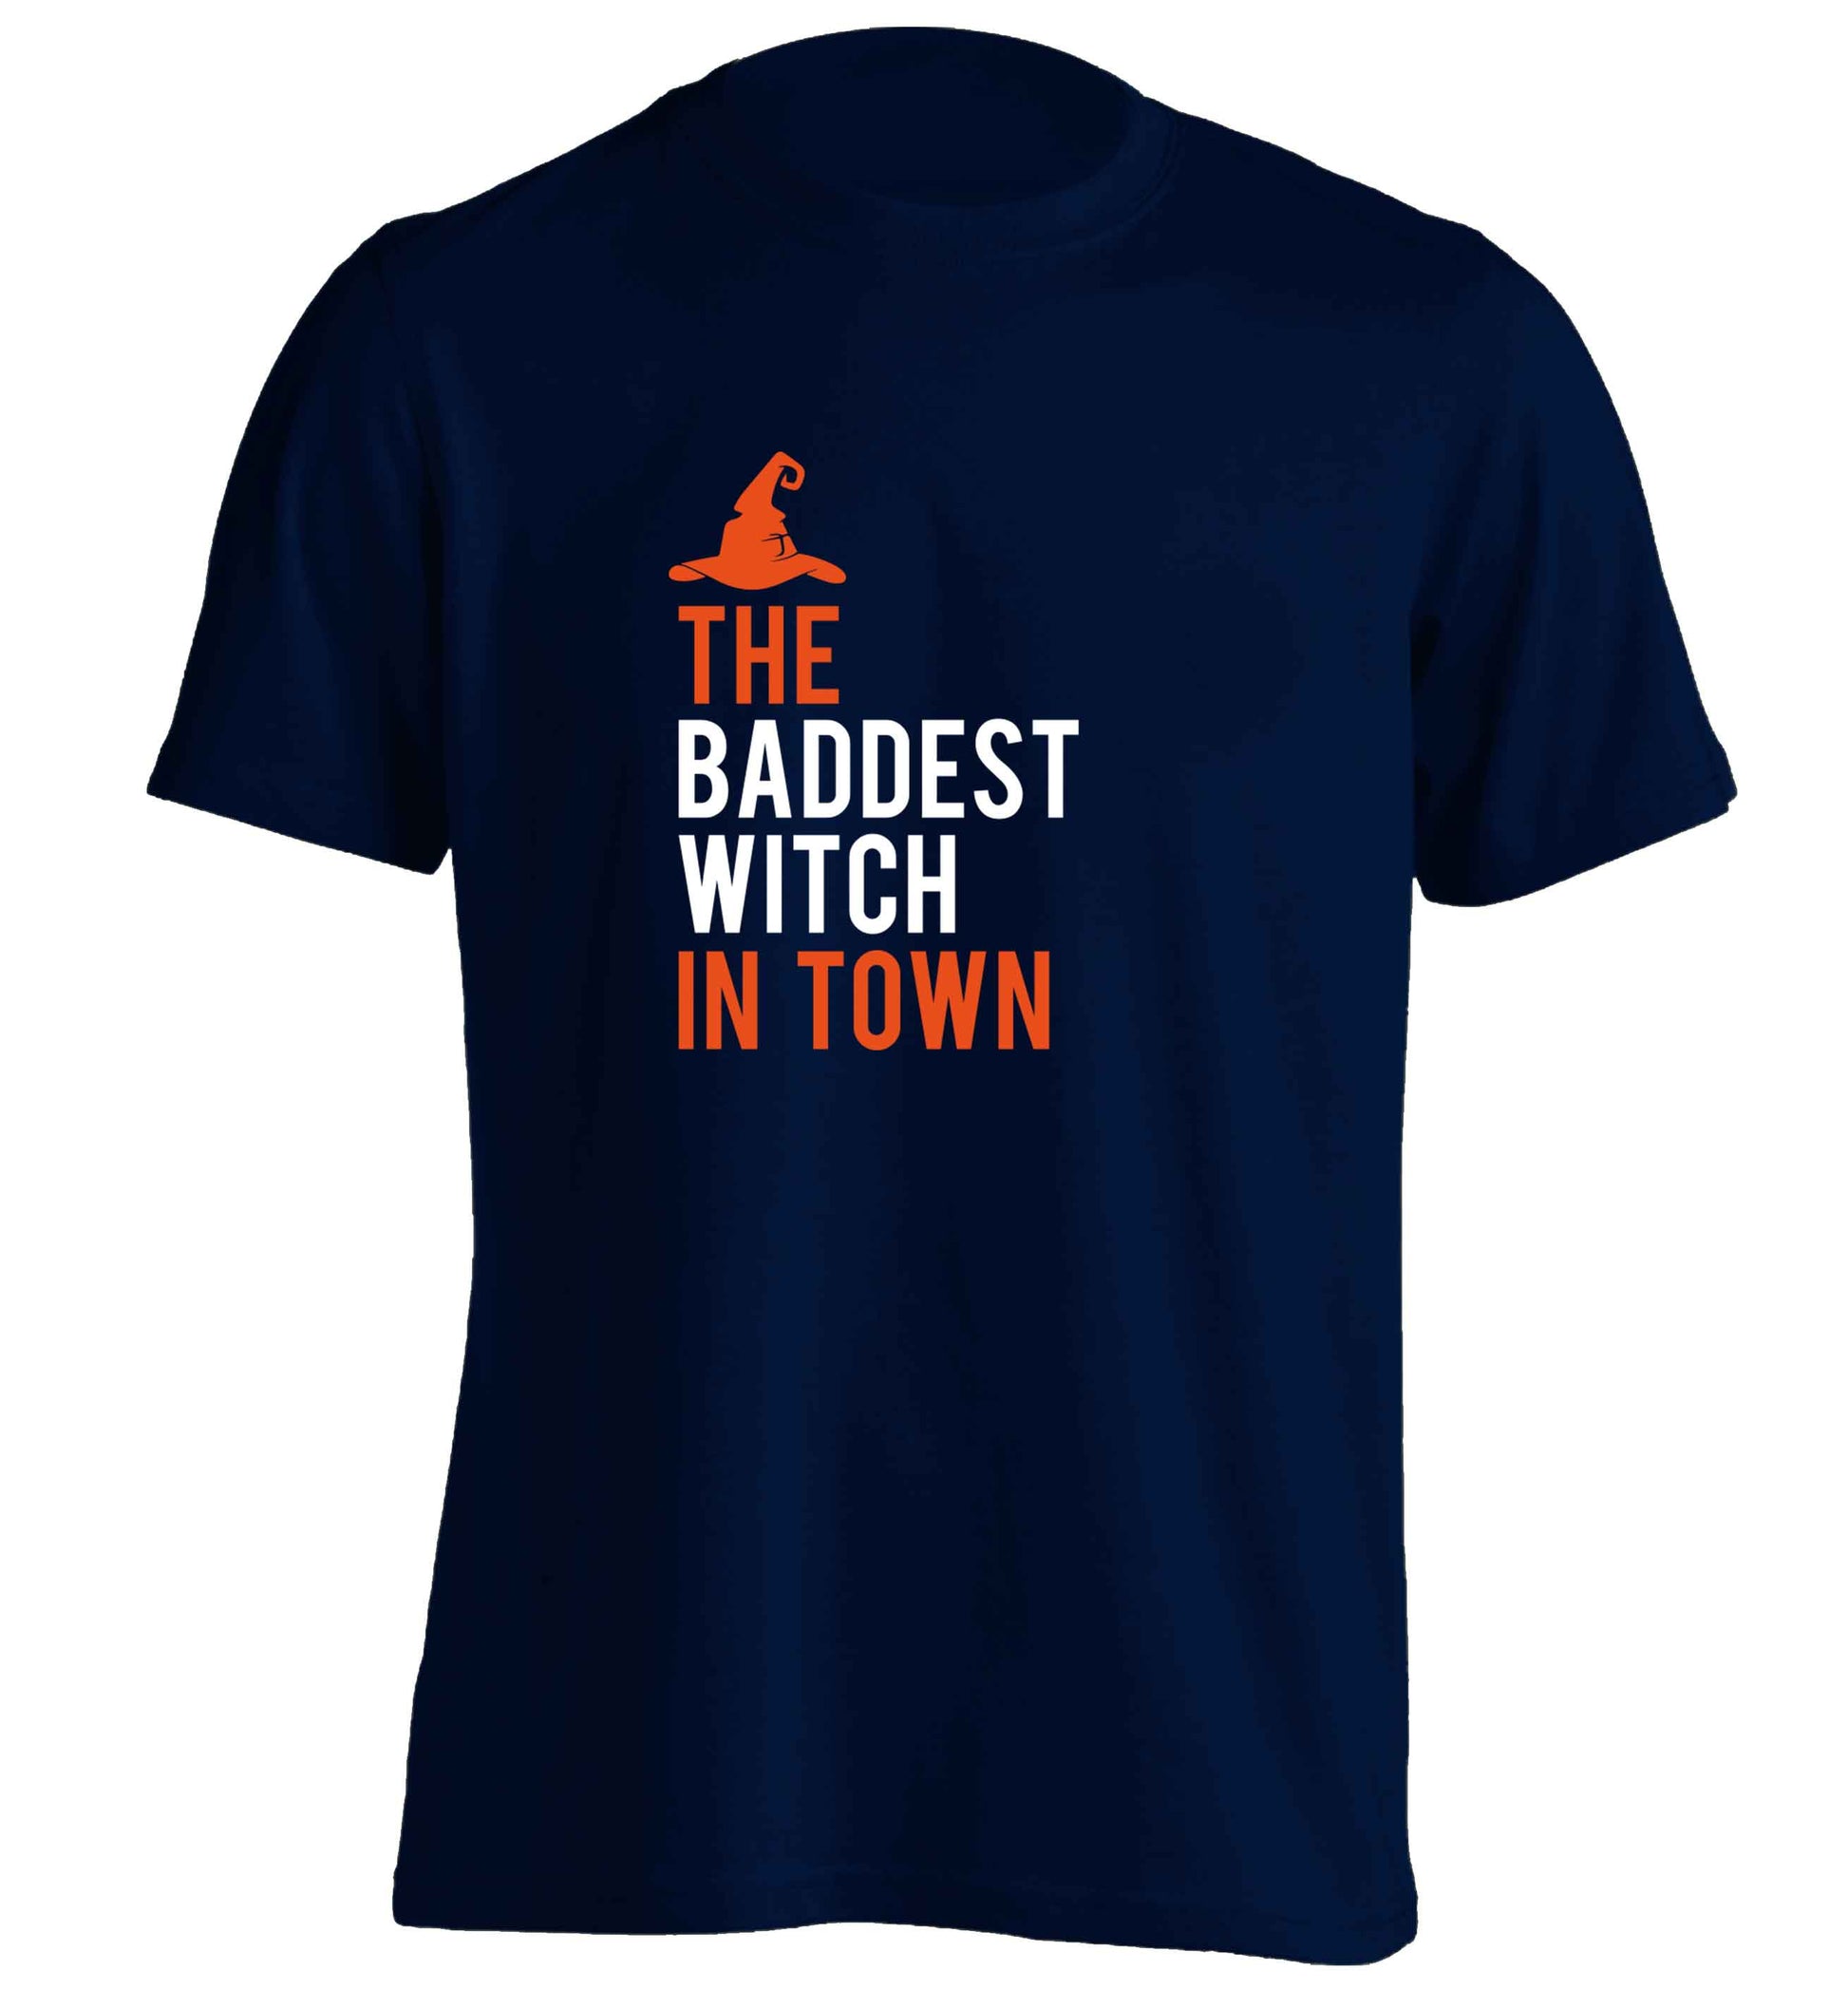 Badest witch in town adults unisex navy Tshirt 2XL